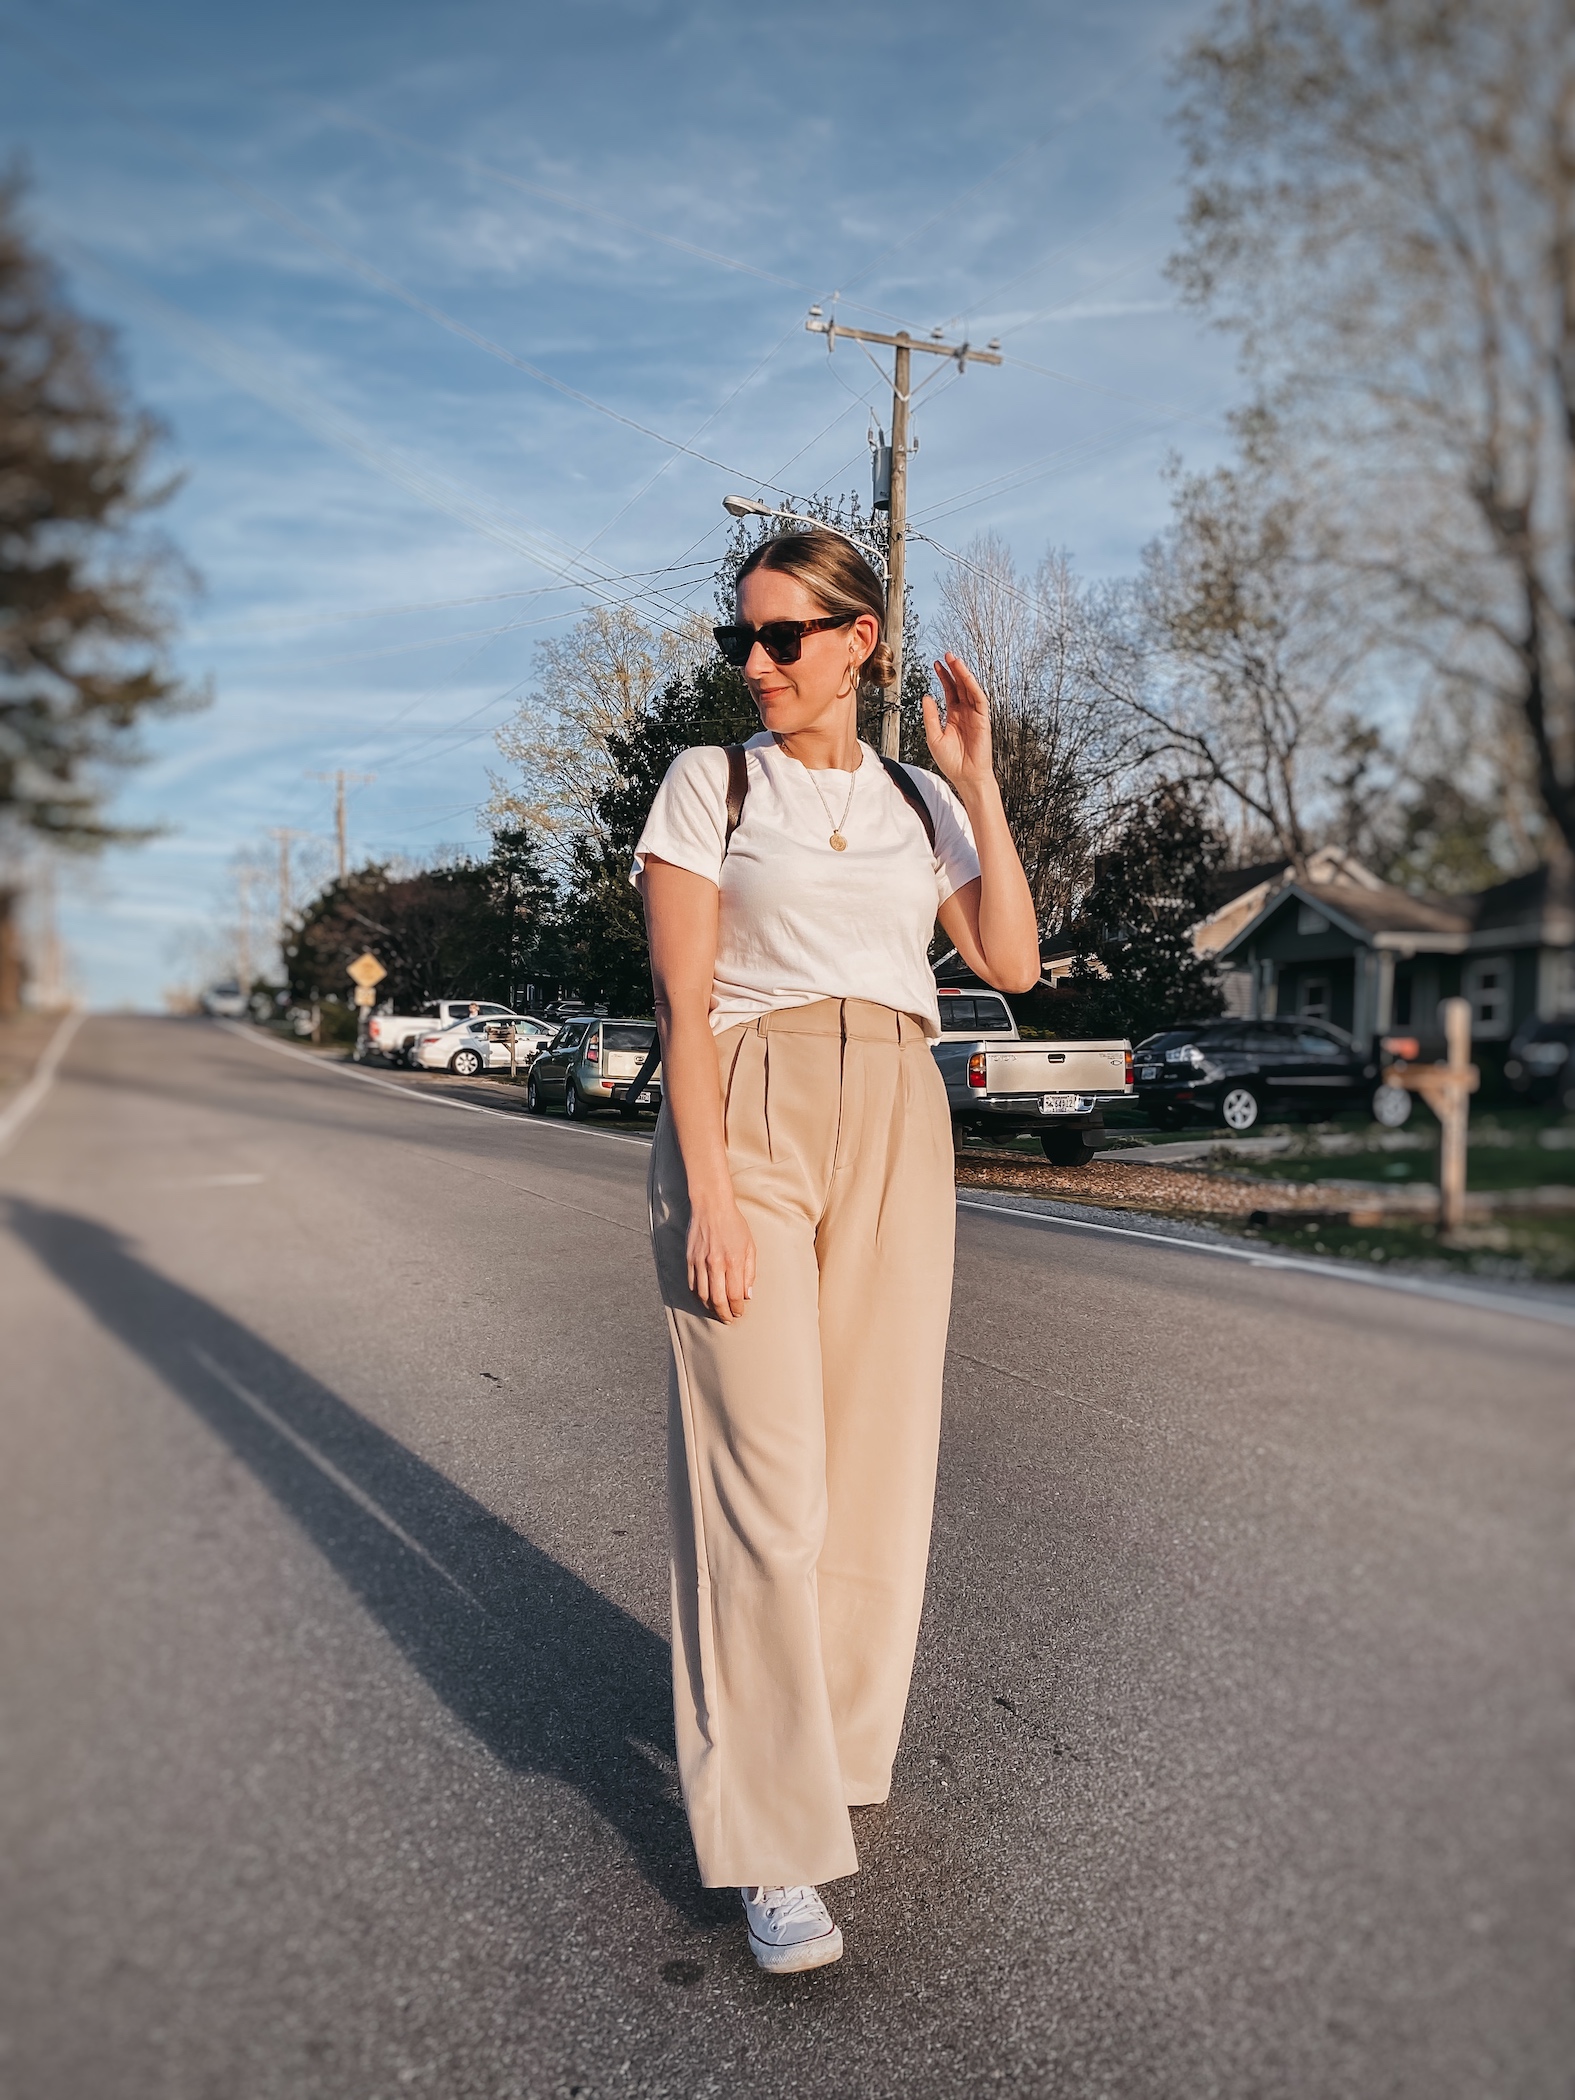 Long sleeve and slit design, along with casual wide-leg pants